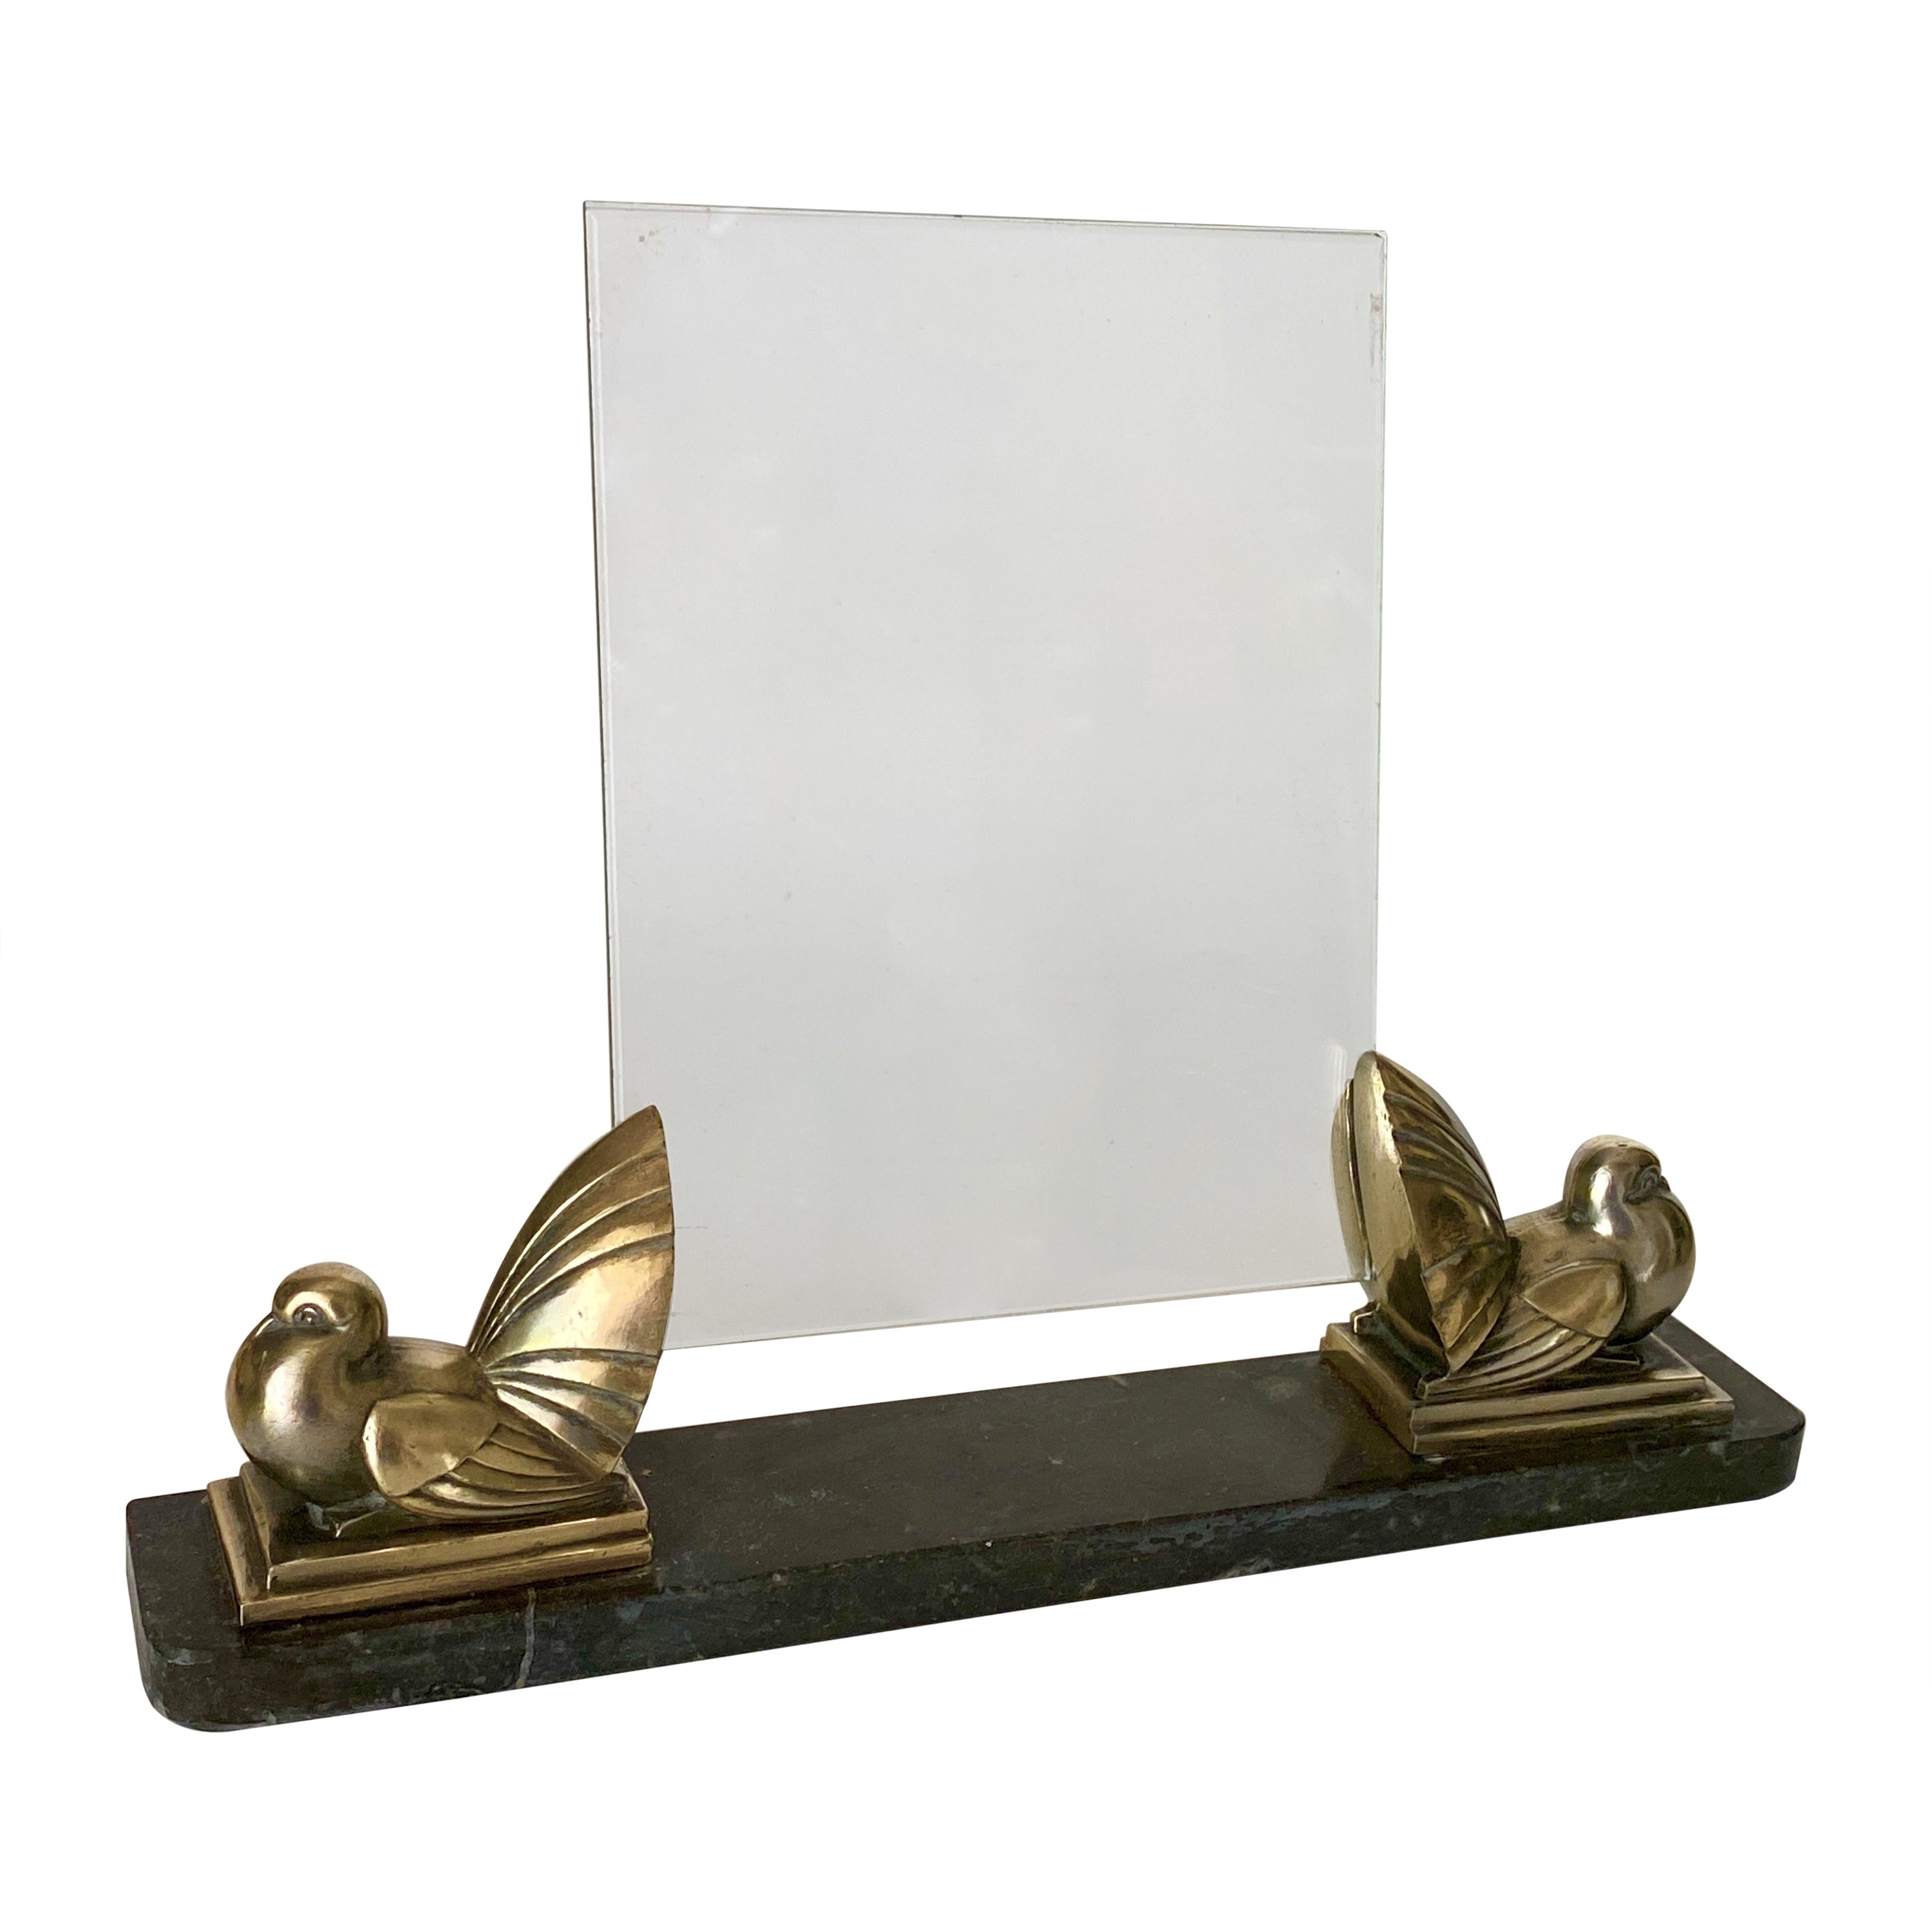 This whimsical and sophisticated picture Art Deco Machine Age frame was realized in France, circa 1935. It features two Brass Sculptures, representing Birds, sit on a volumetric rectangular basein Marble a rectangular pair of glass sheet  intended